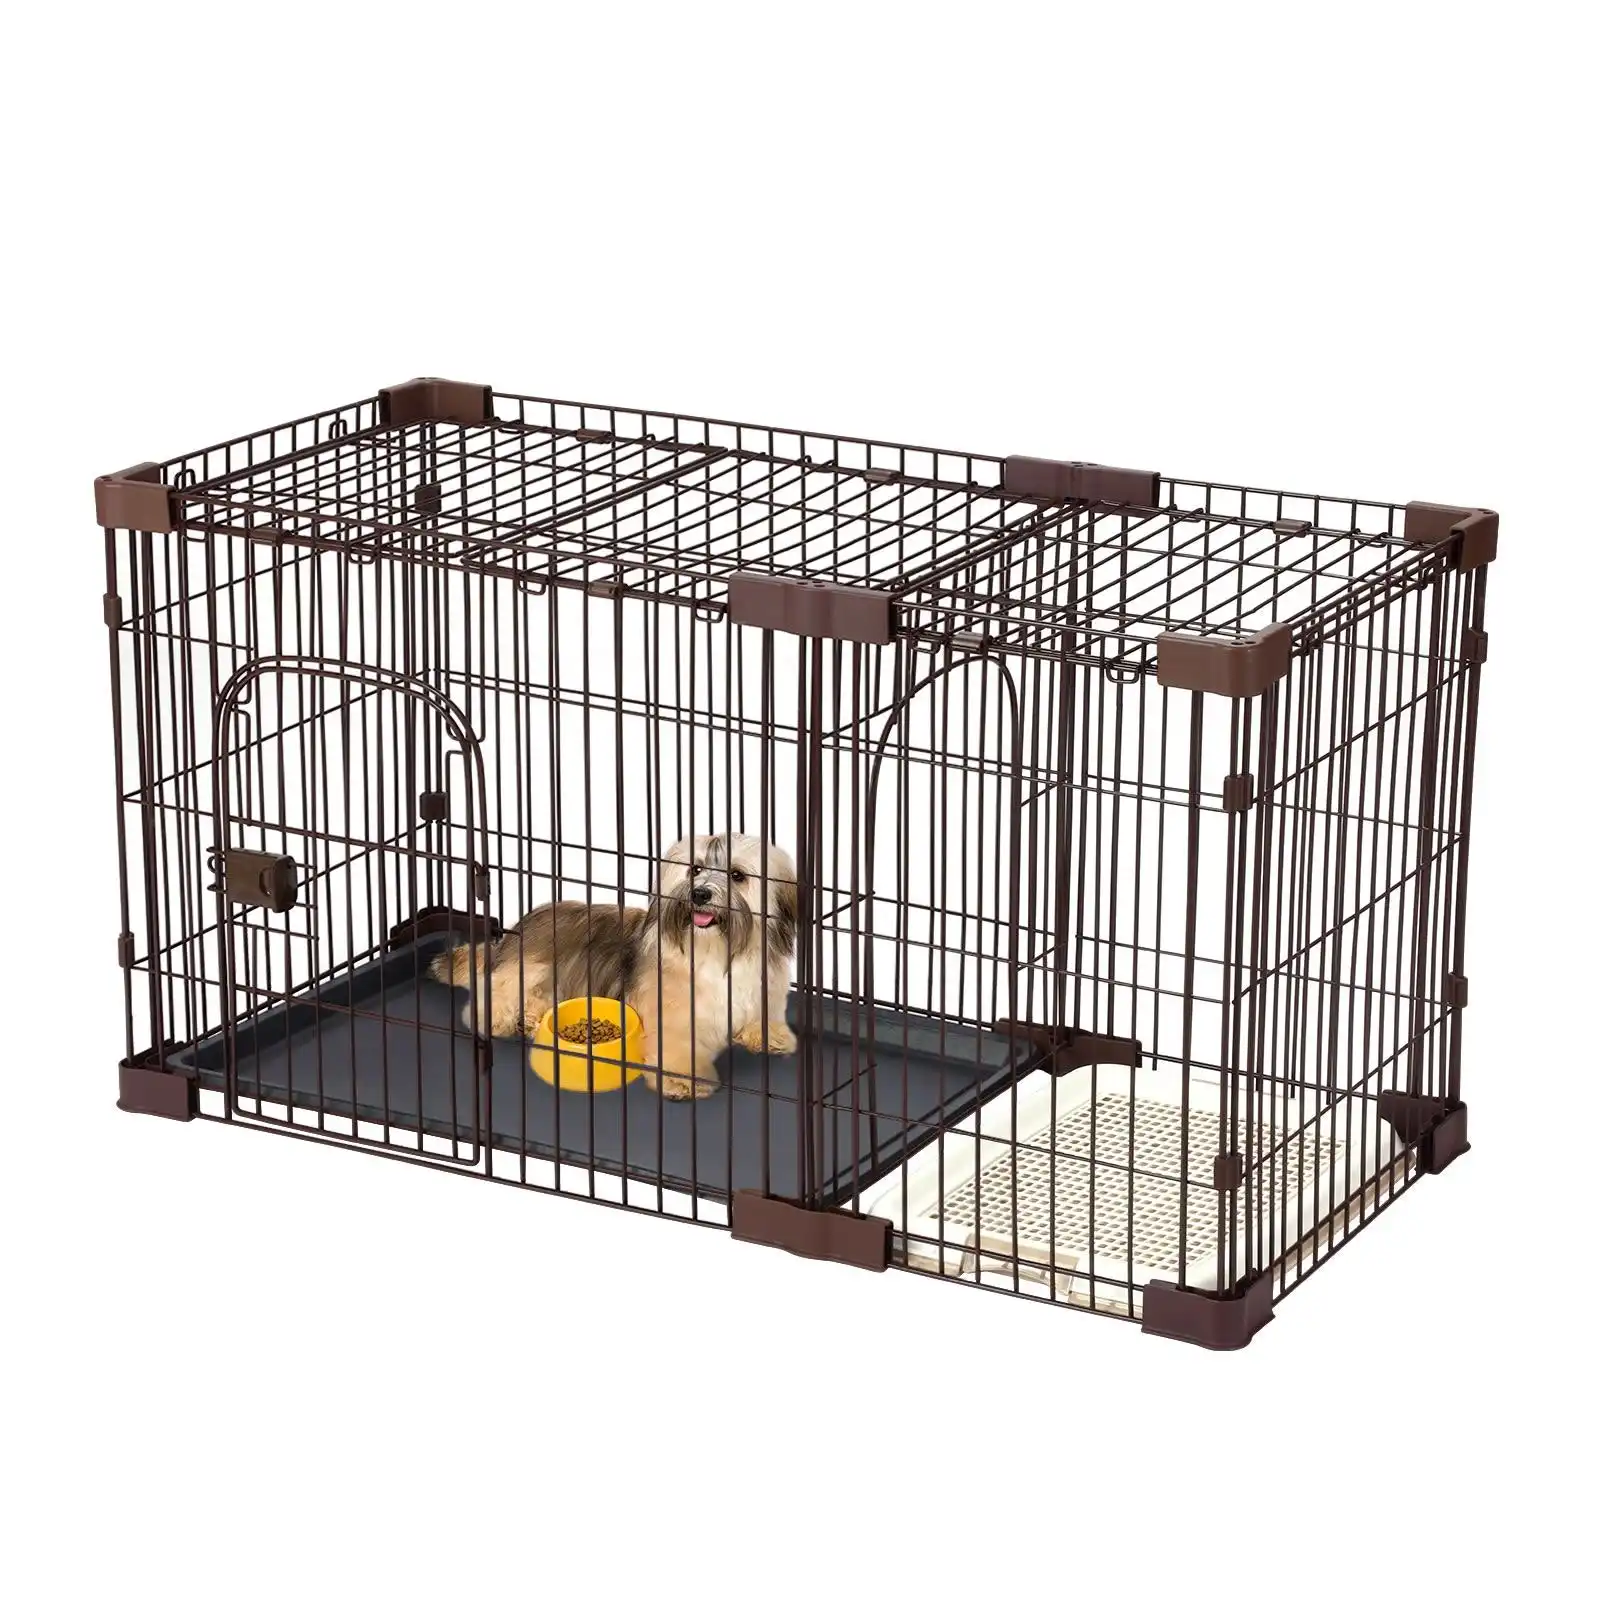 Pet Scene Dog Cage Cat Crate Doggy Kennel Puppy Playpen Enclosure Pet House Home Toilet Tray Wired L